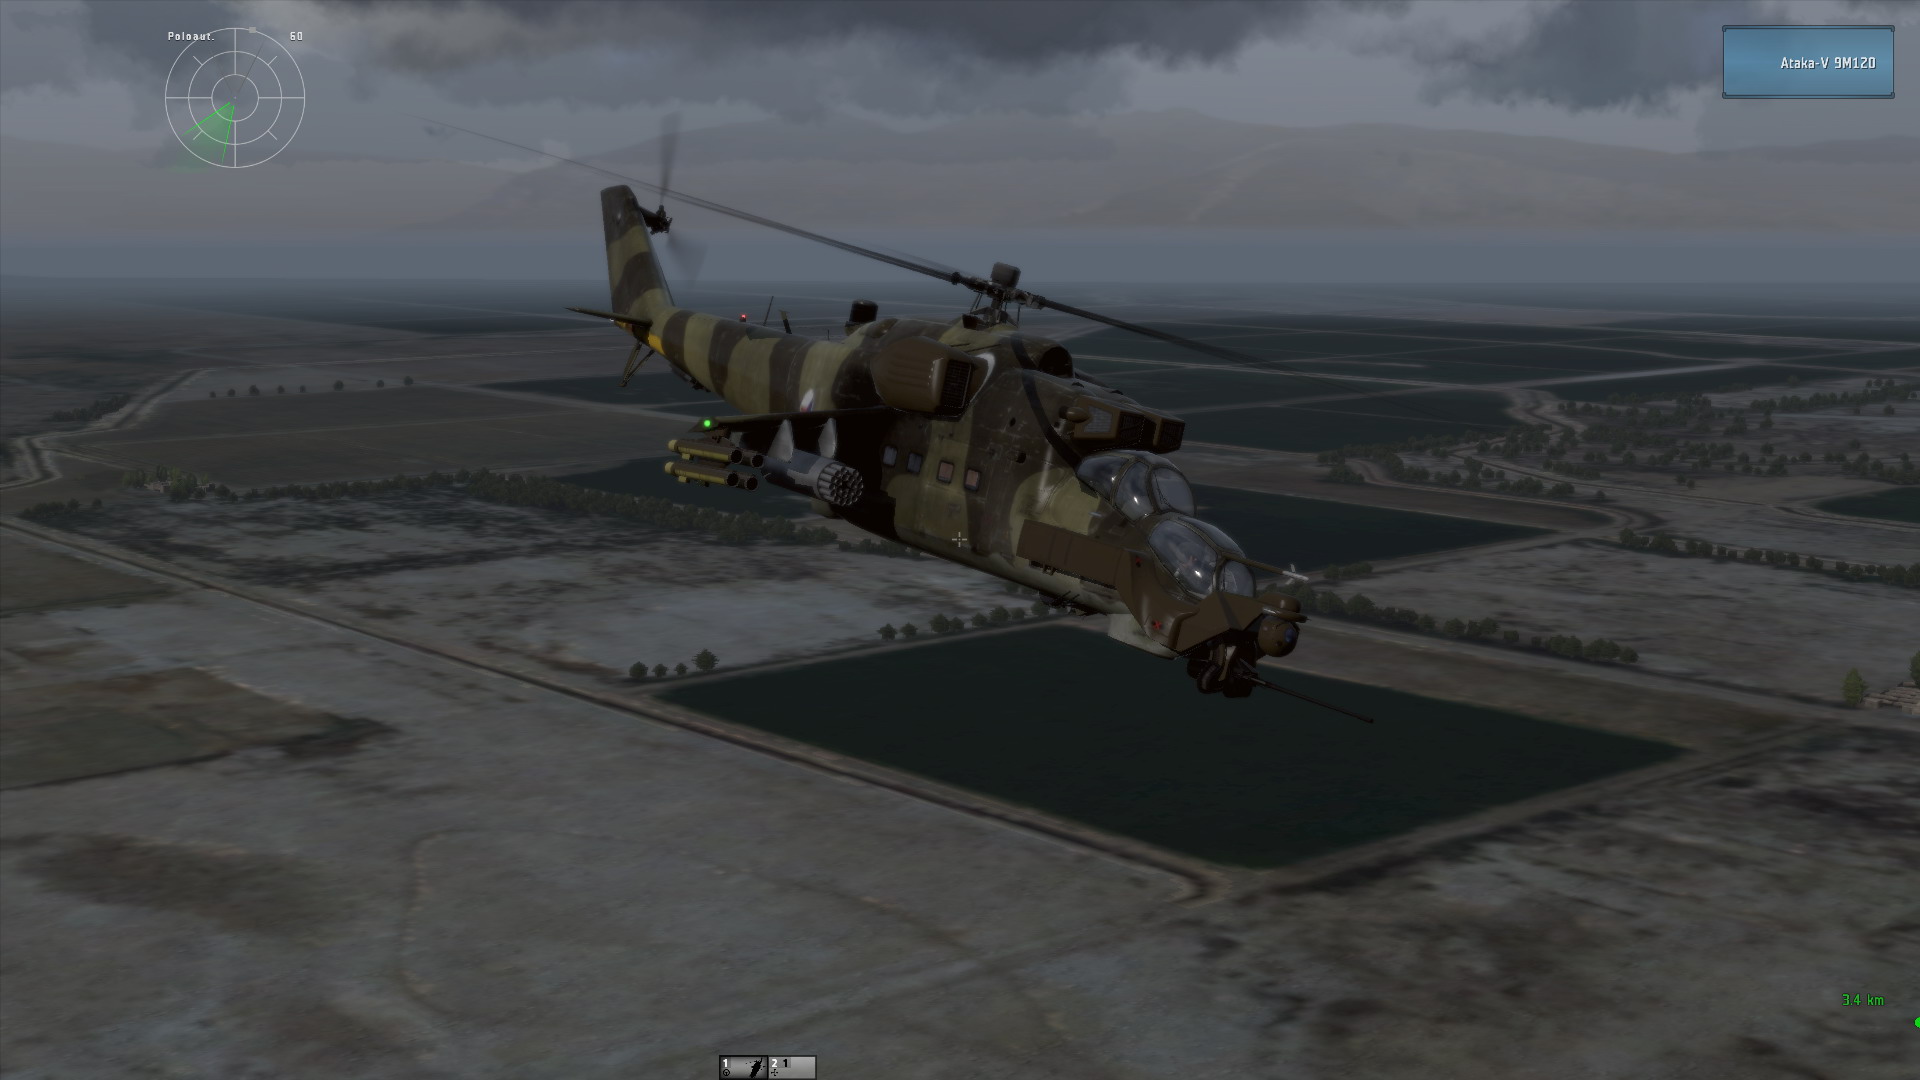 Take on Helicopters: Hinds